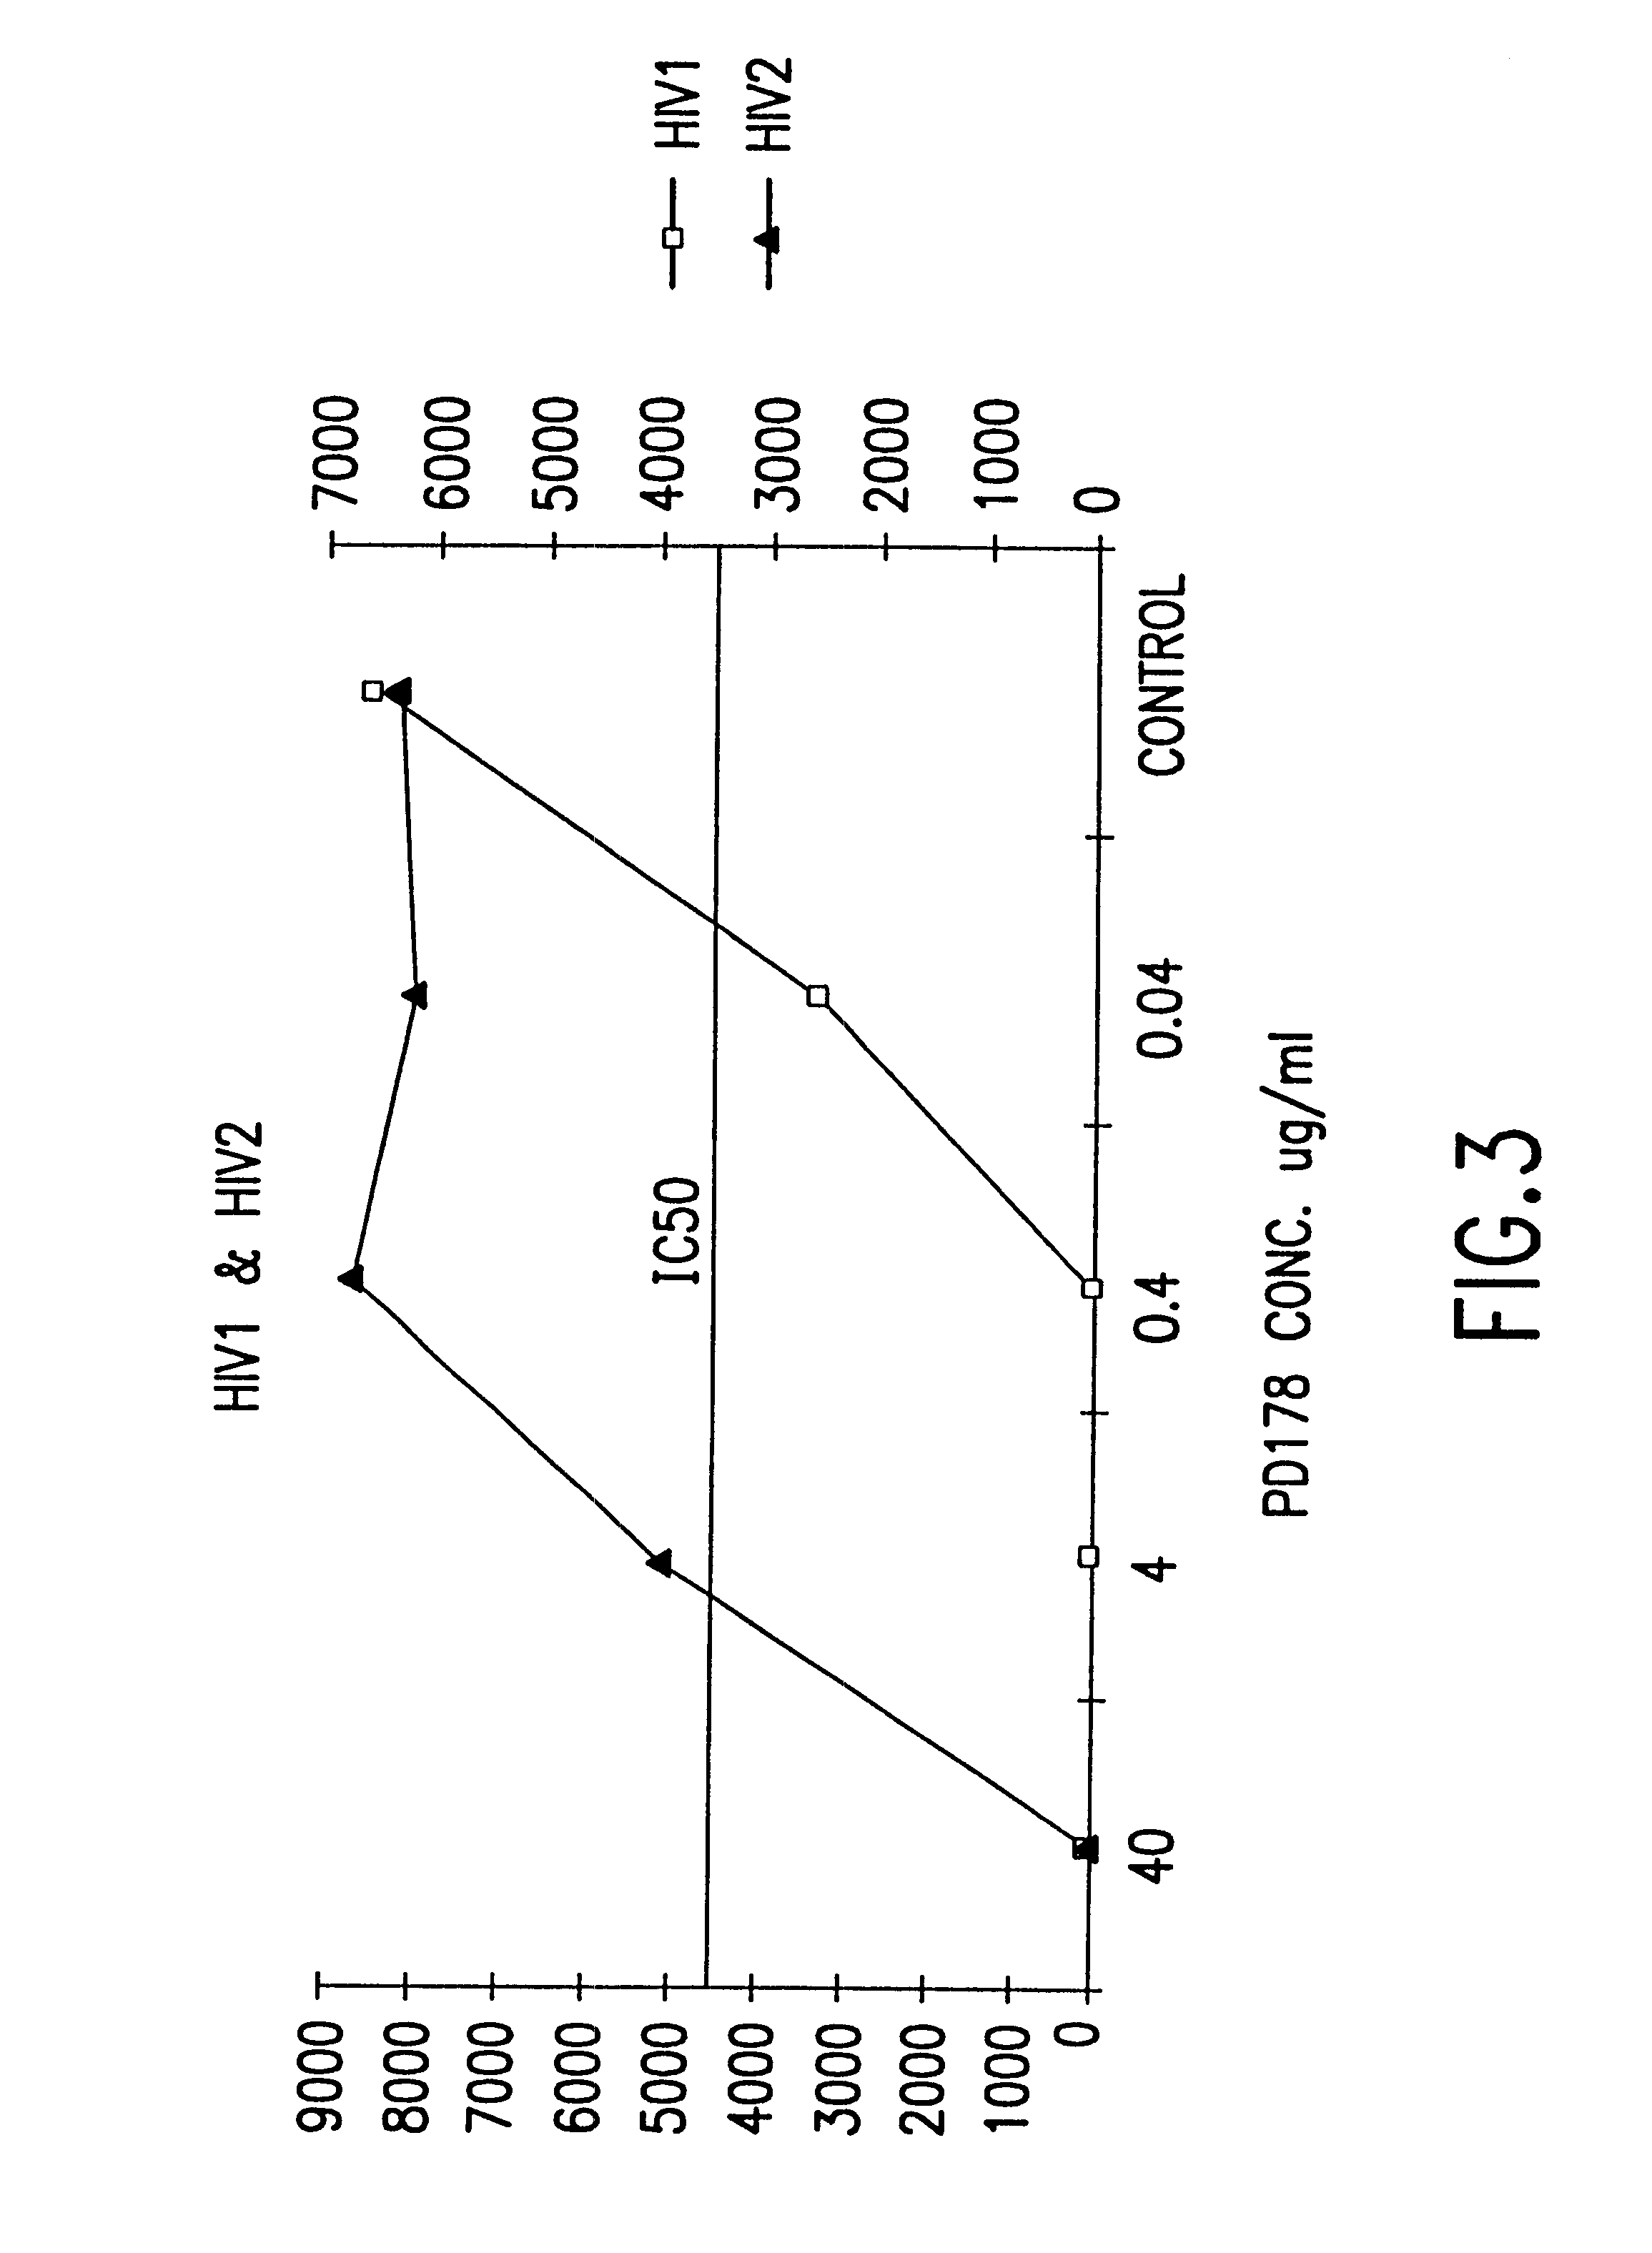 Methods for the inhibition of respiratory syncytial virus transmission